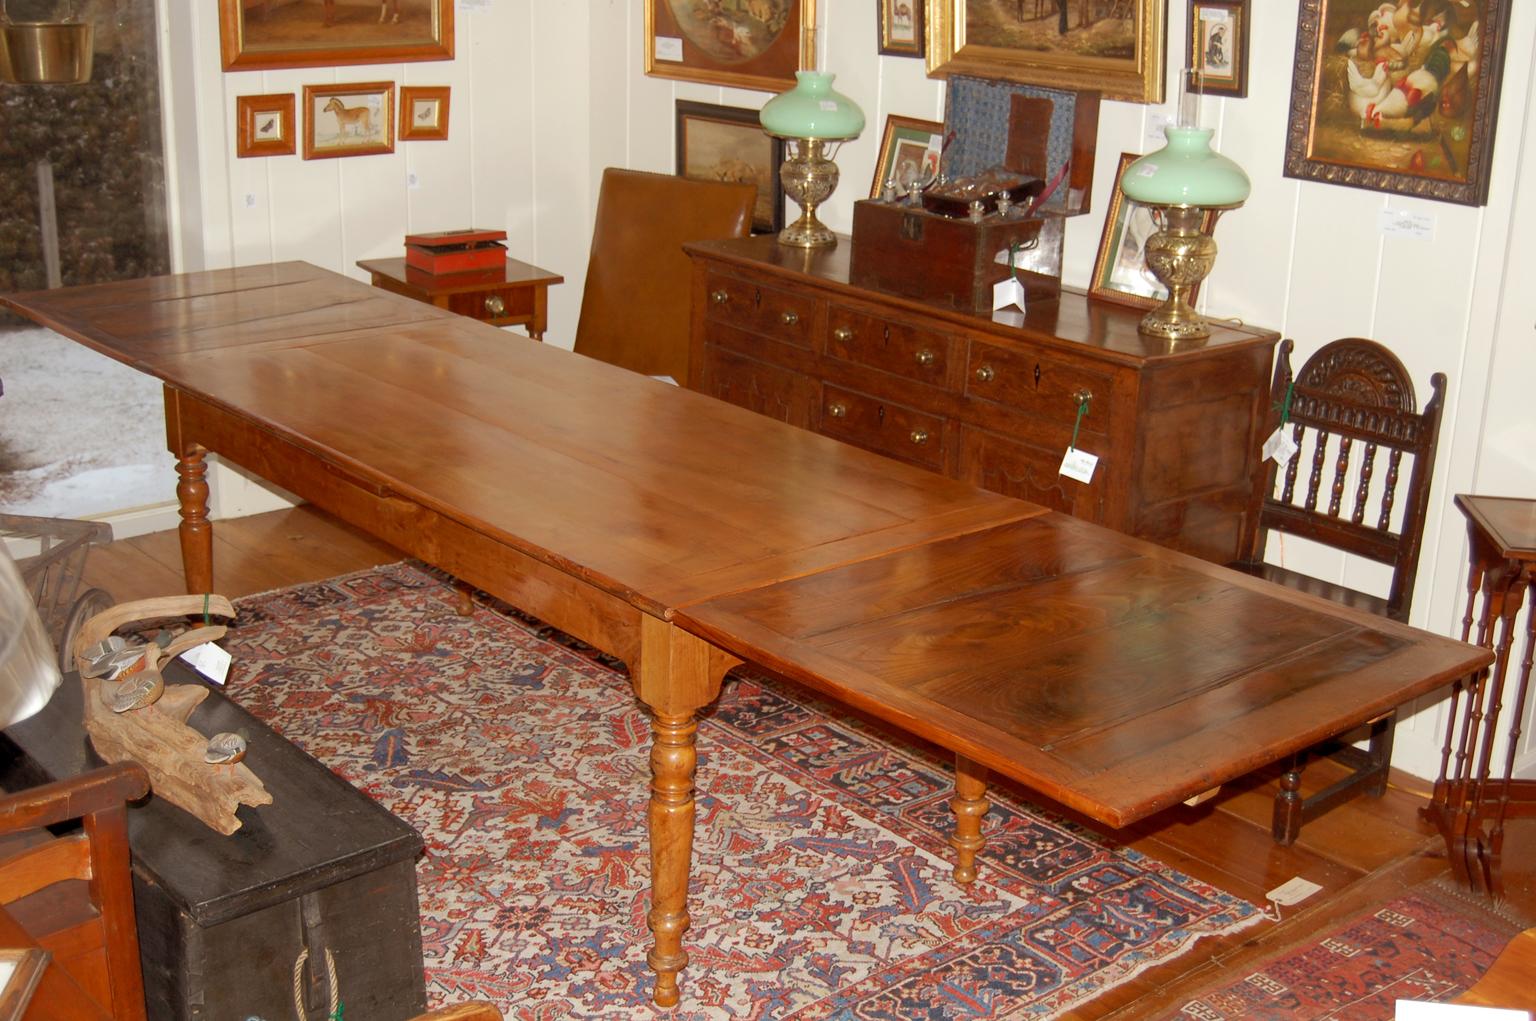 French Provincial cherry and chestnut extending farmhouse table of the mid 19th century. The table is 78 1/2 inches long but hidden under the table top are two leaves that pullout and extend the length to either 113